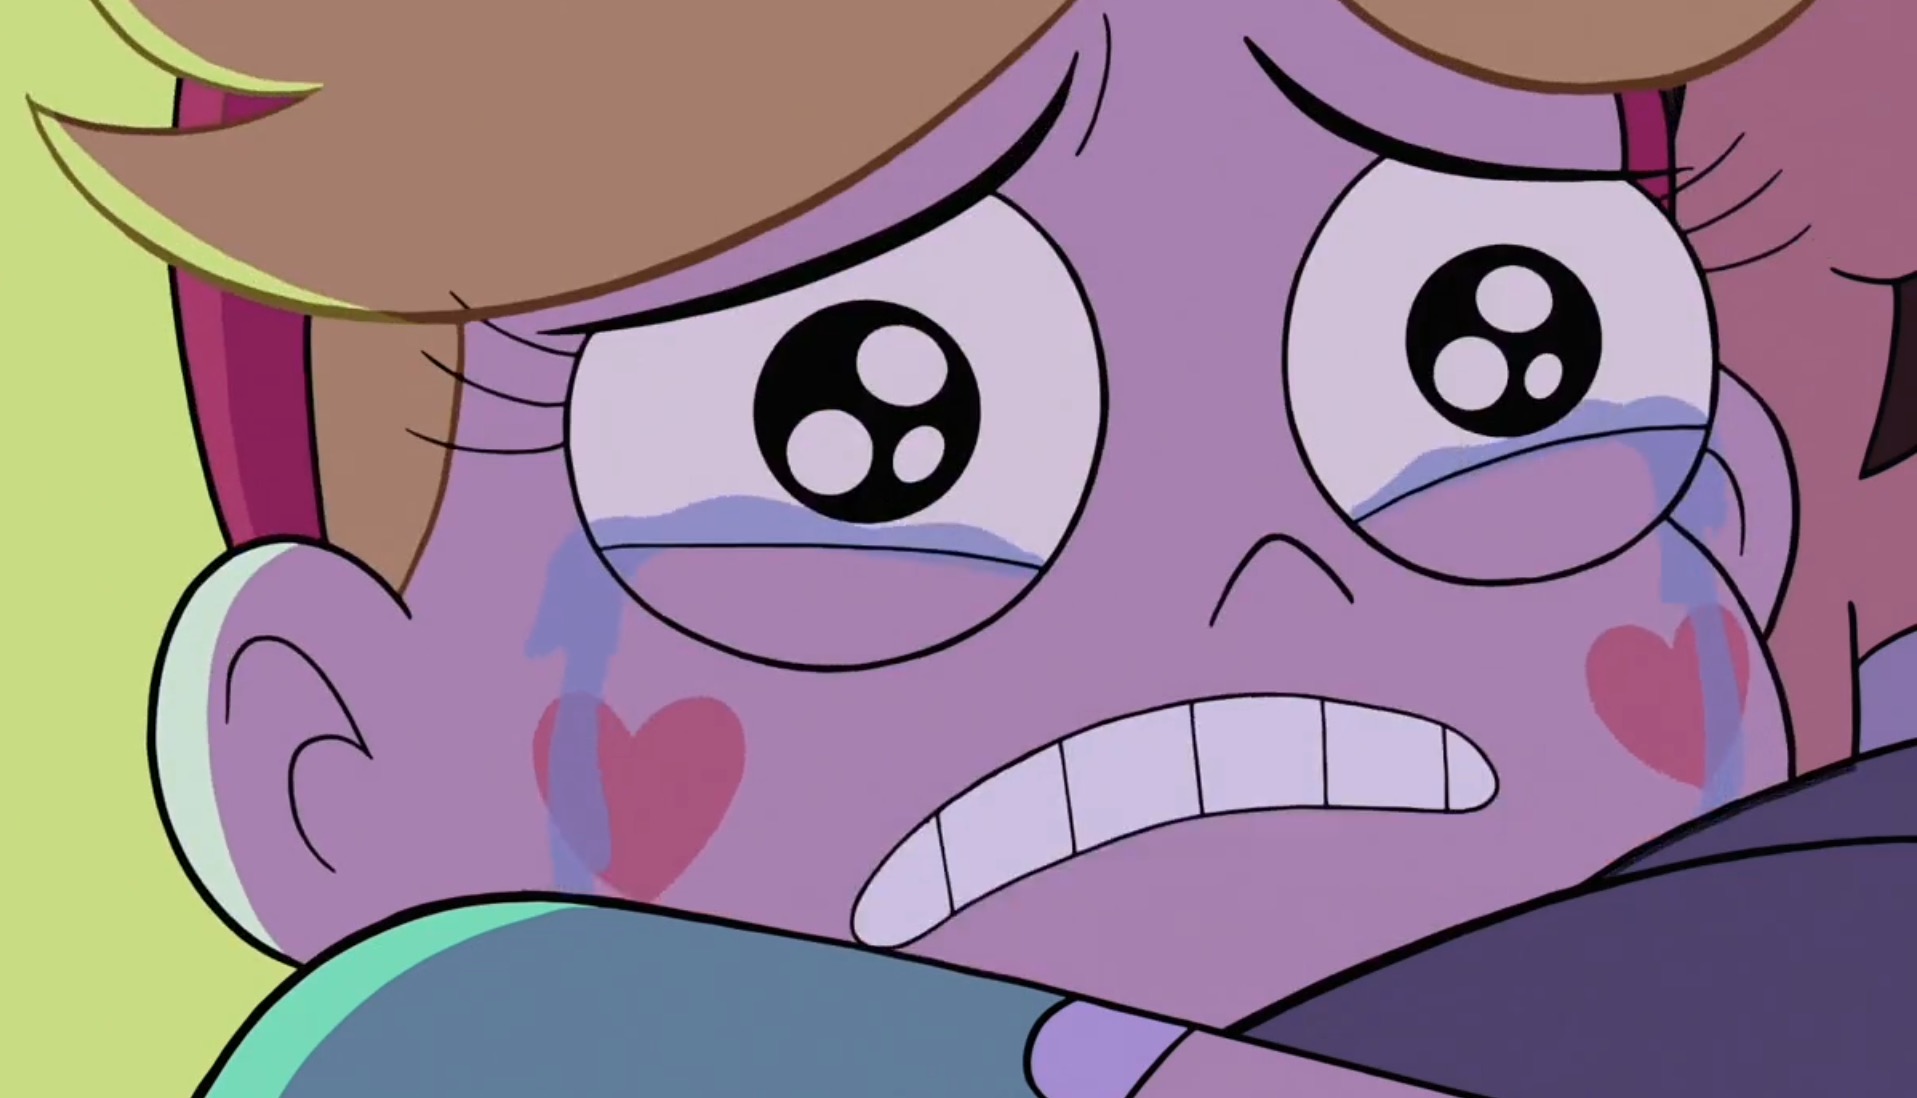 Star vs the forces of evil : Starco tears edition.